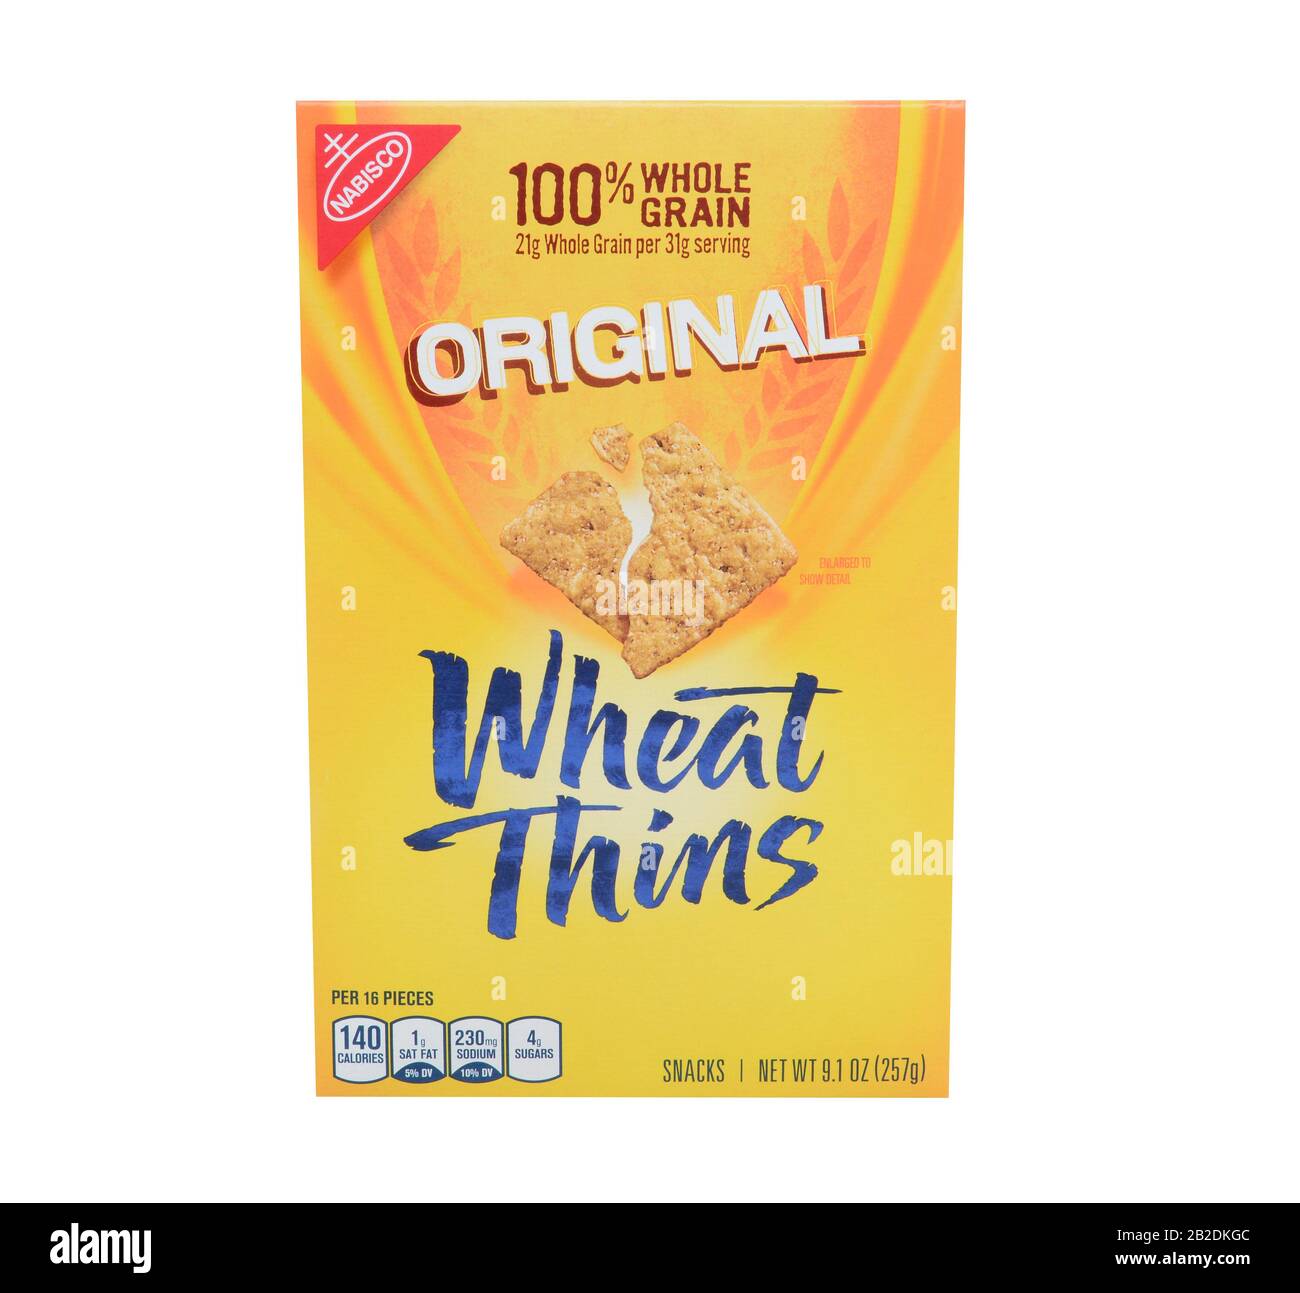 IRVINE, CA - FEBRUARY 19, 2015: Nabisco Wheat Thins Crackers. Originally known as the National Biscuit Company, Nabisco is an American manufacturer of Stock Photo